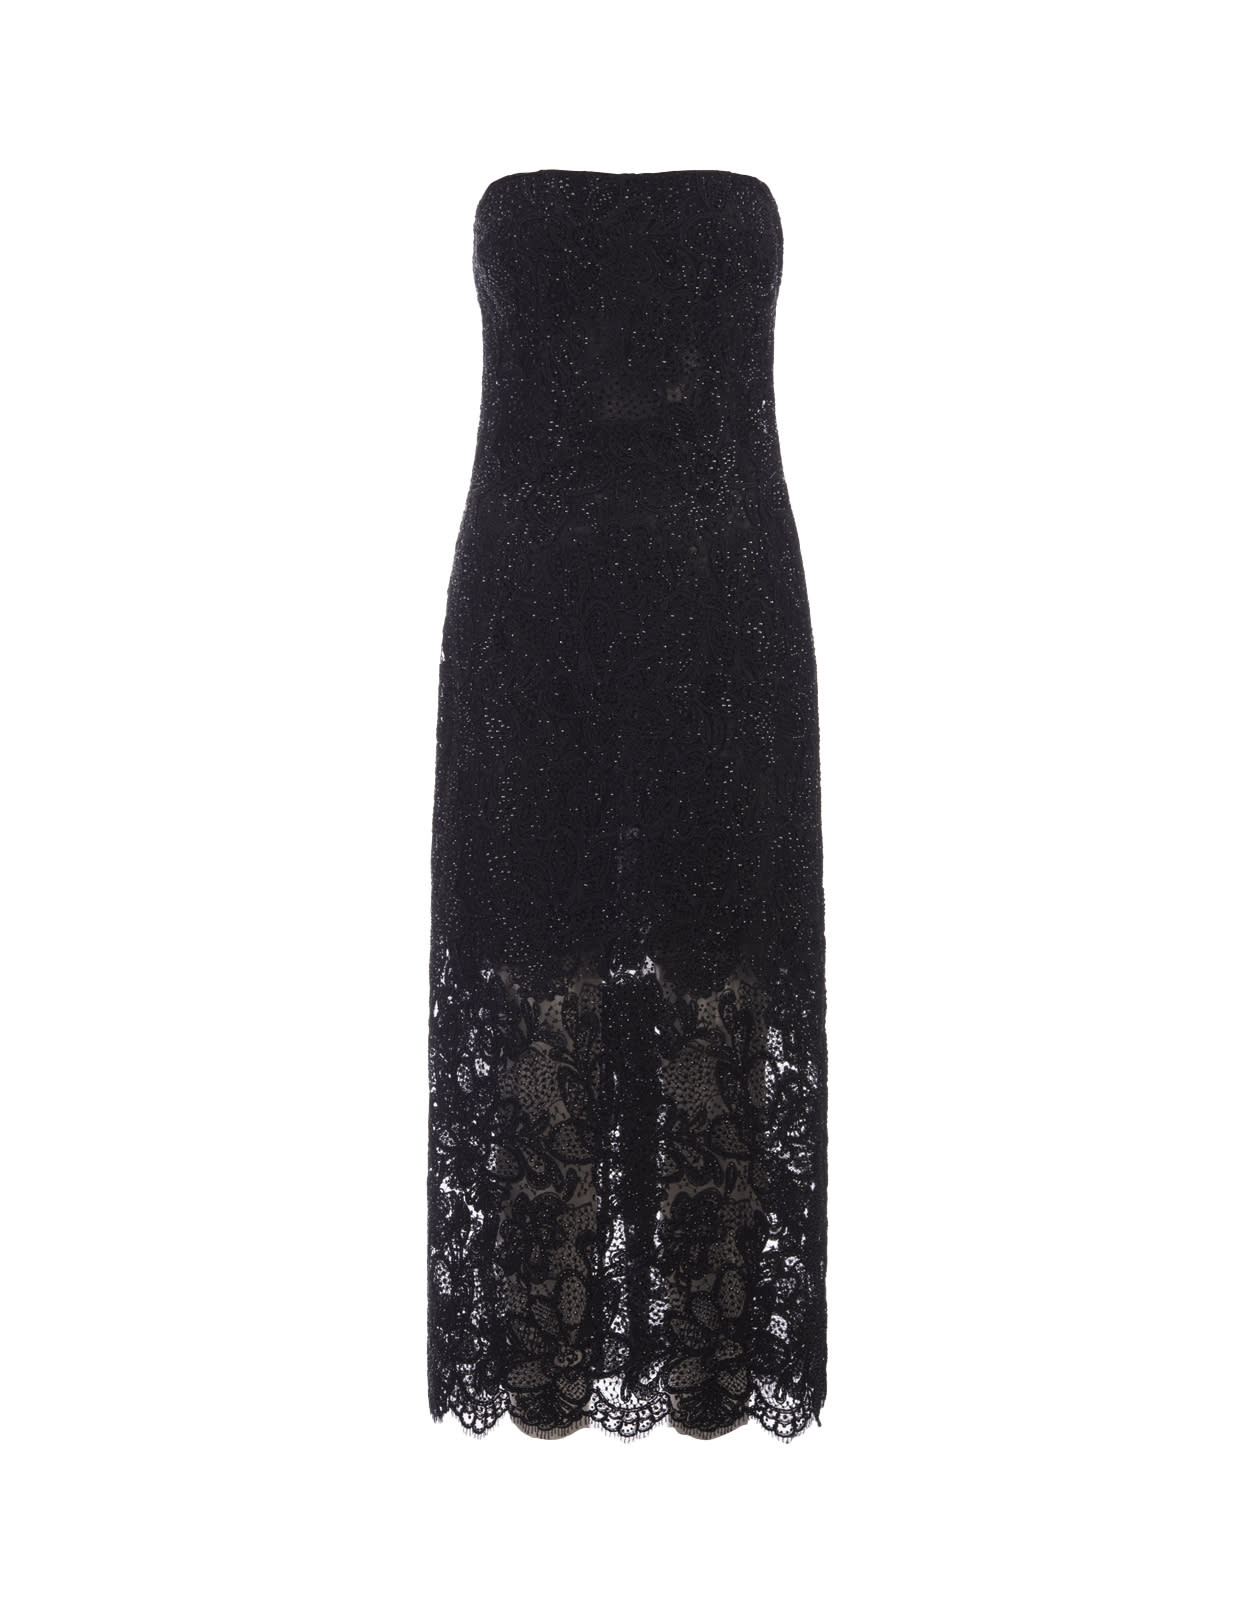 Midi Dress In Black Lace With Crystals